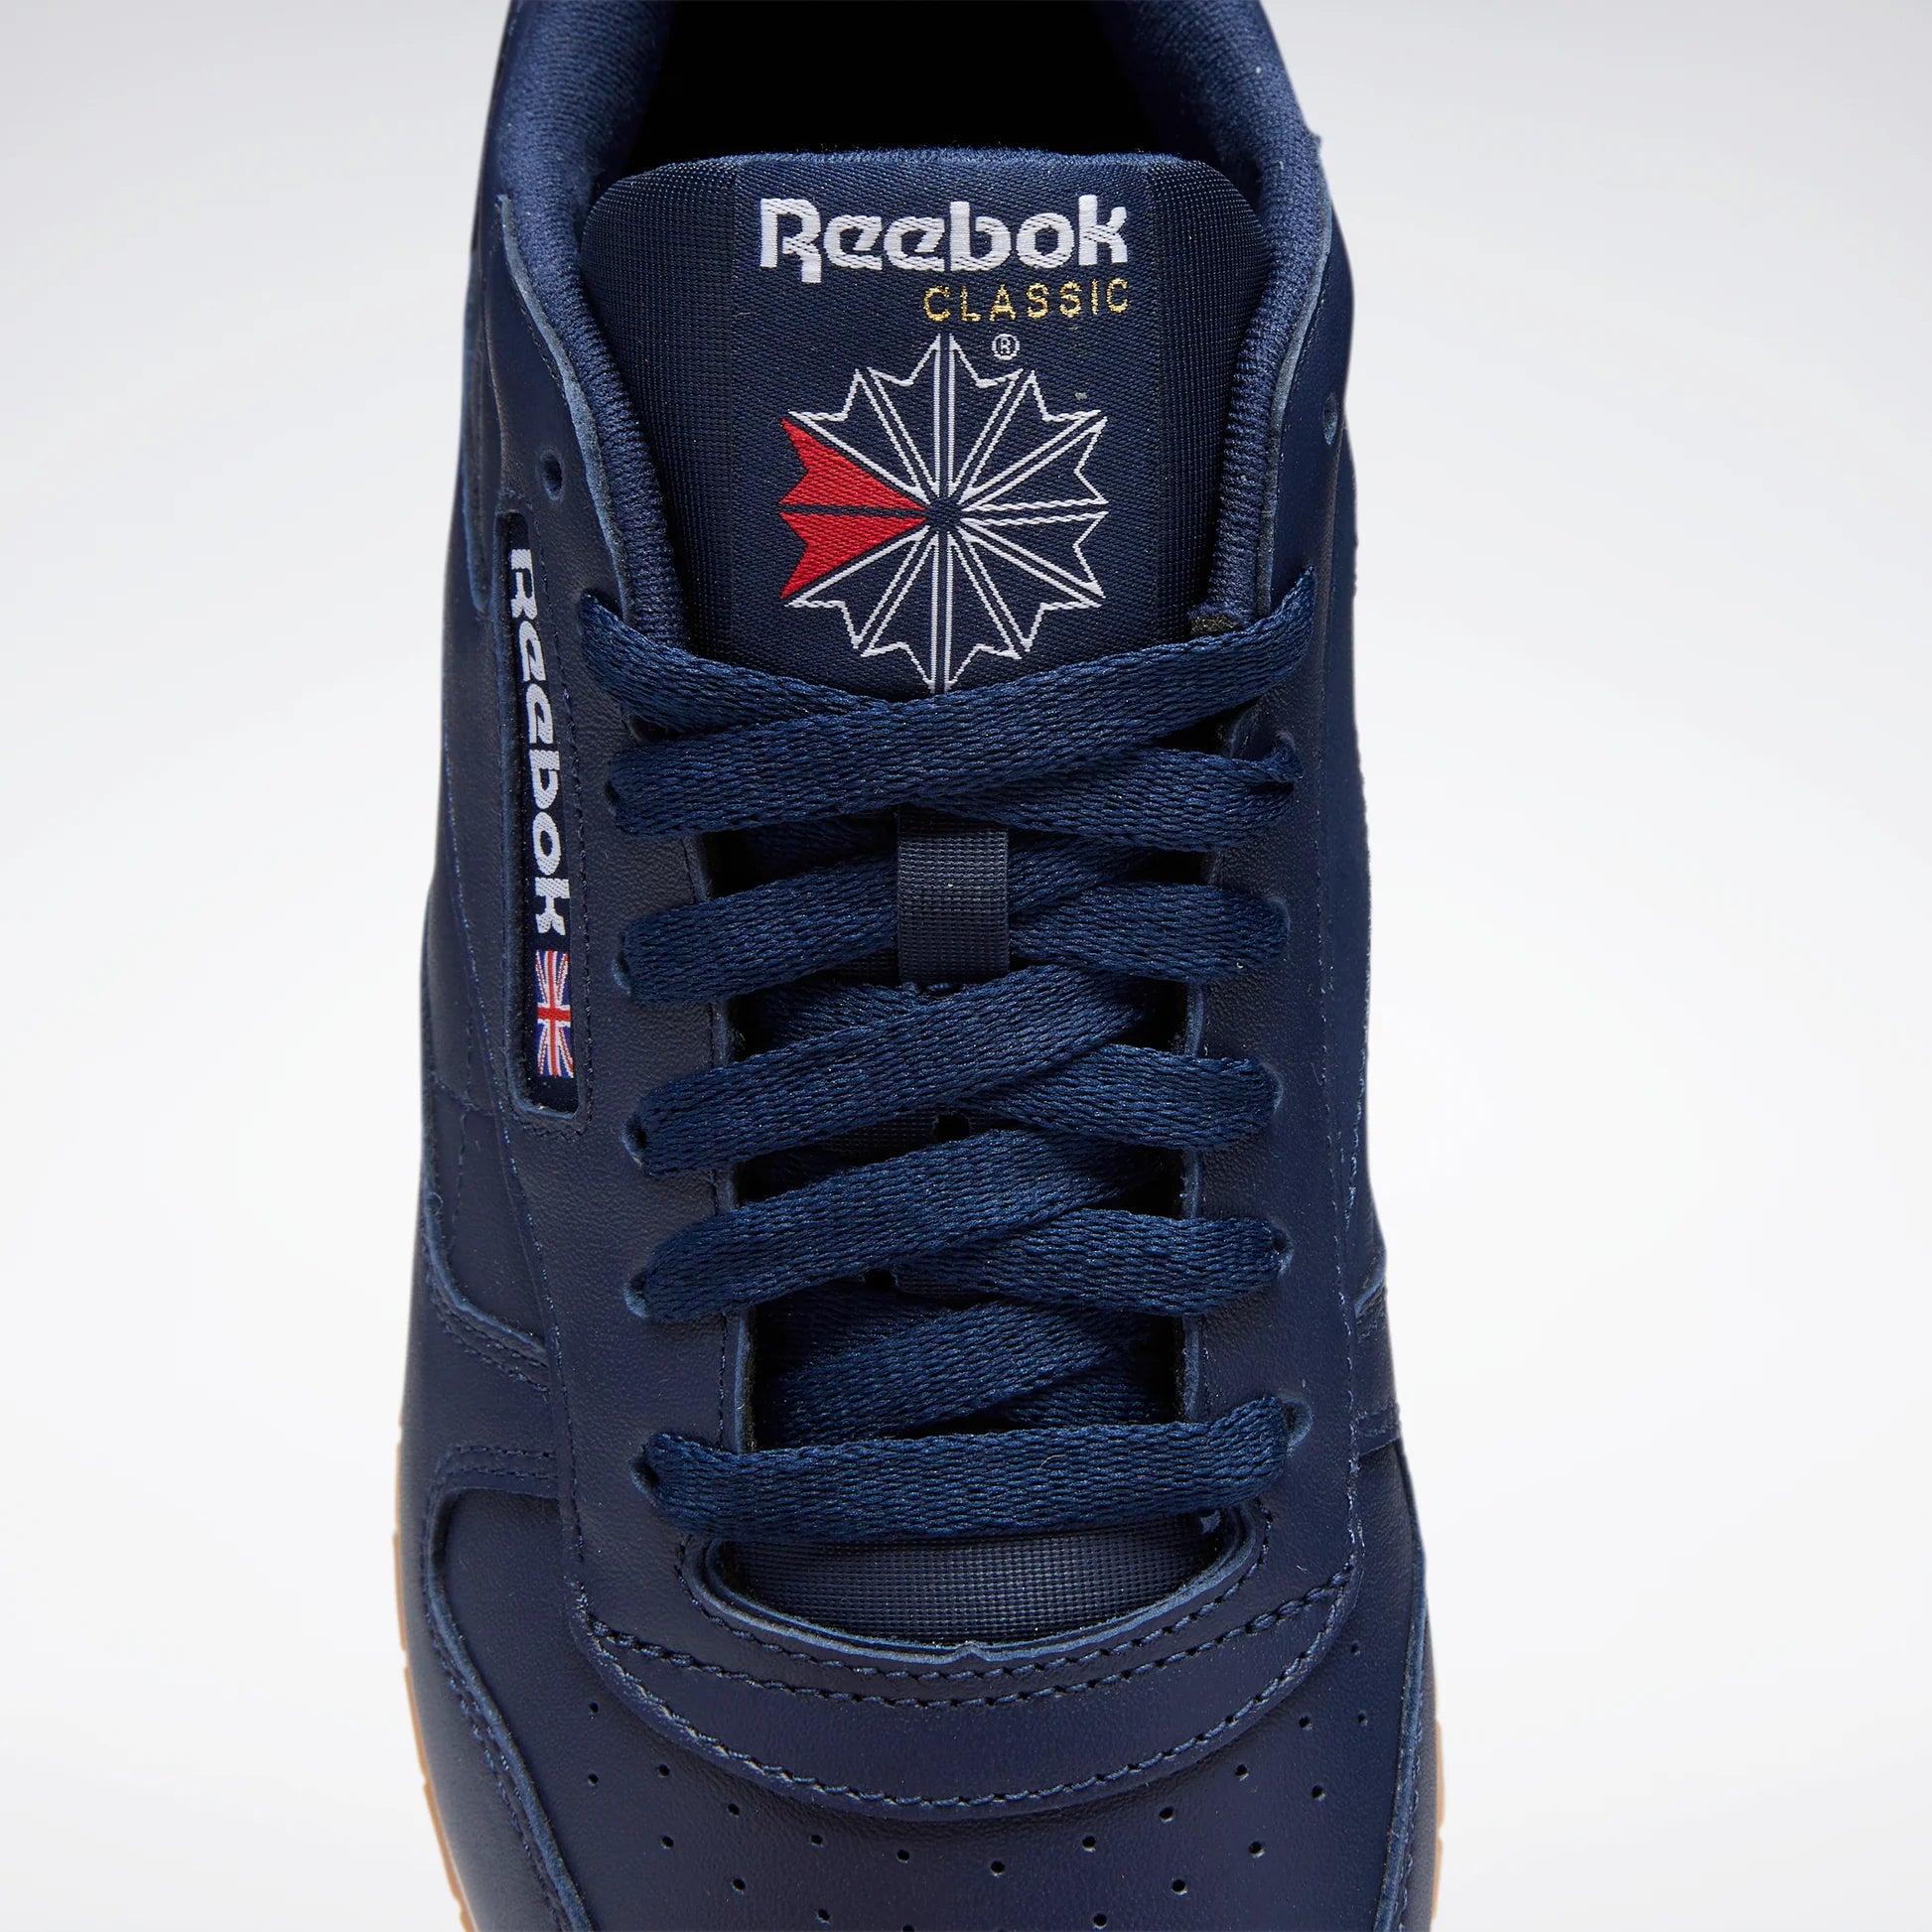 R-D15 (Reebok classic leather vector navy/white) 62398184